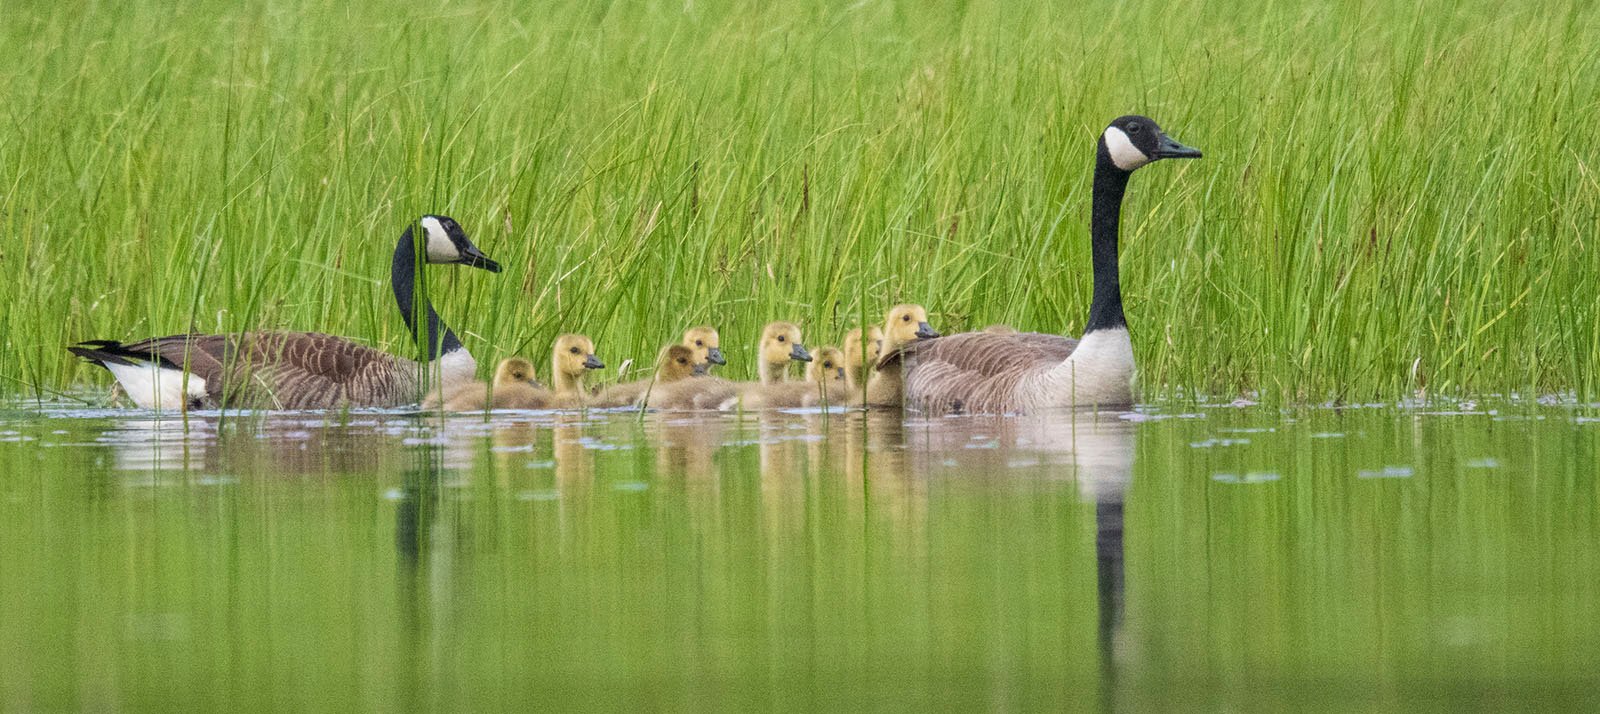 Two adult geese swim in a calm lake surrounded by tall green grass, accompanied by seven fluffy goslings. The serene setting reflects the family of birds as they glide together through the water.